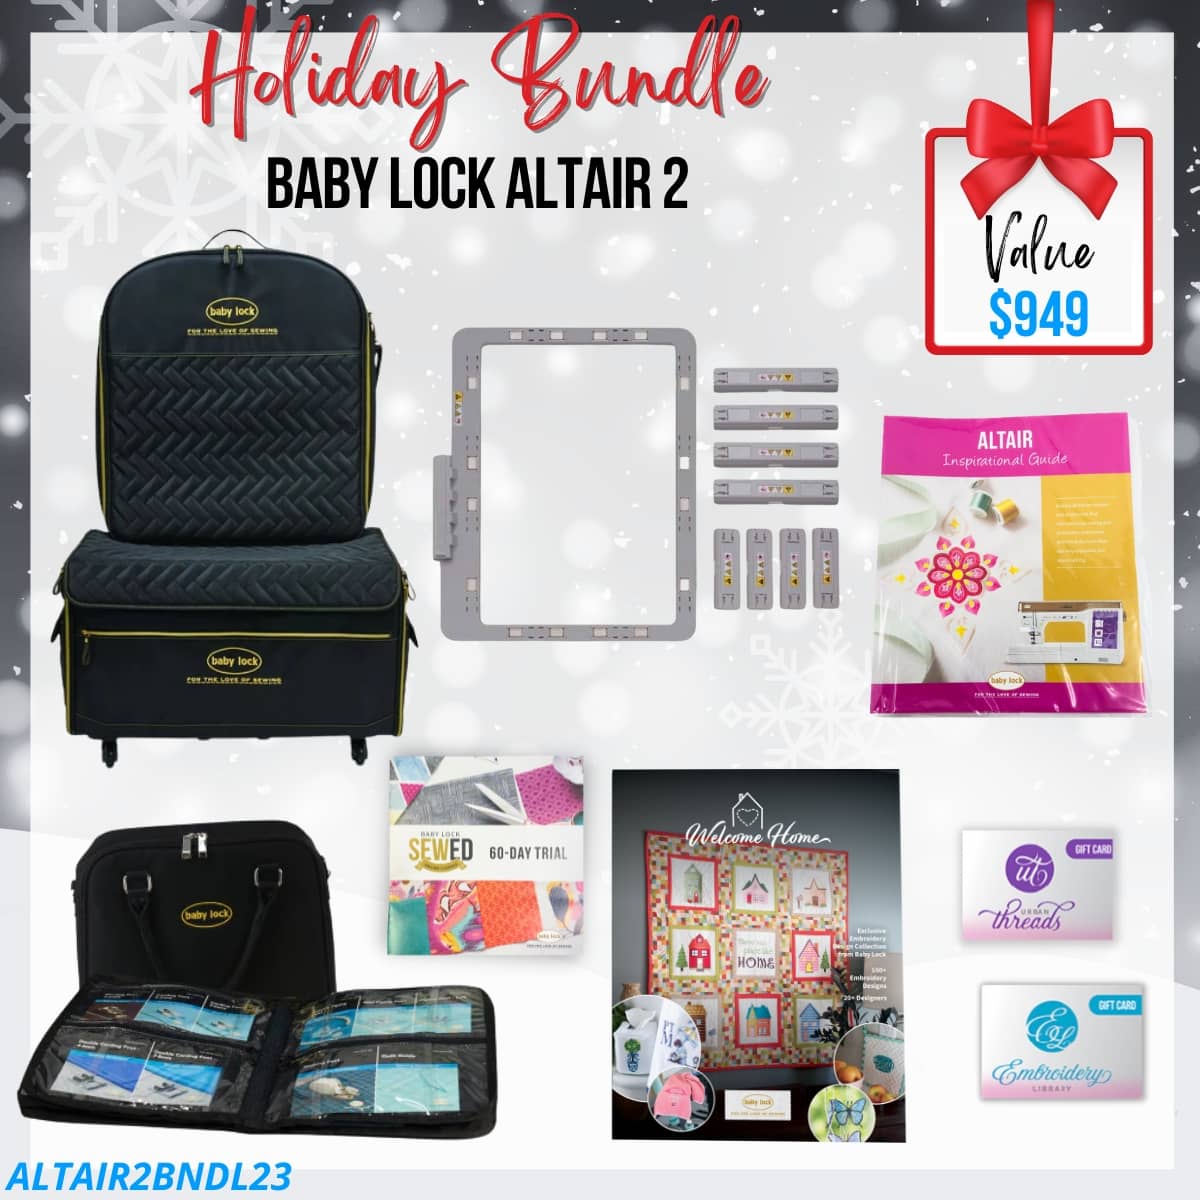 Baby Lock Altair 2 Bundle for holiday sale